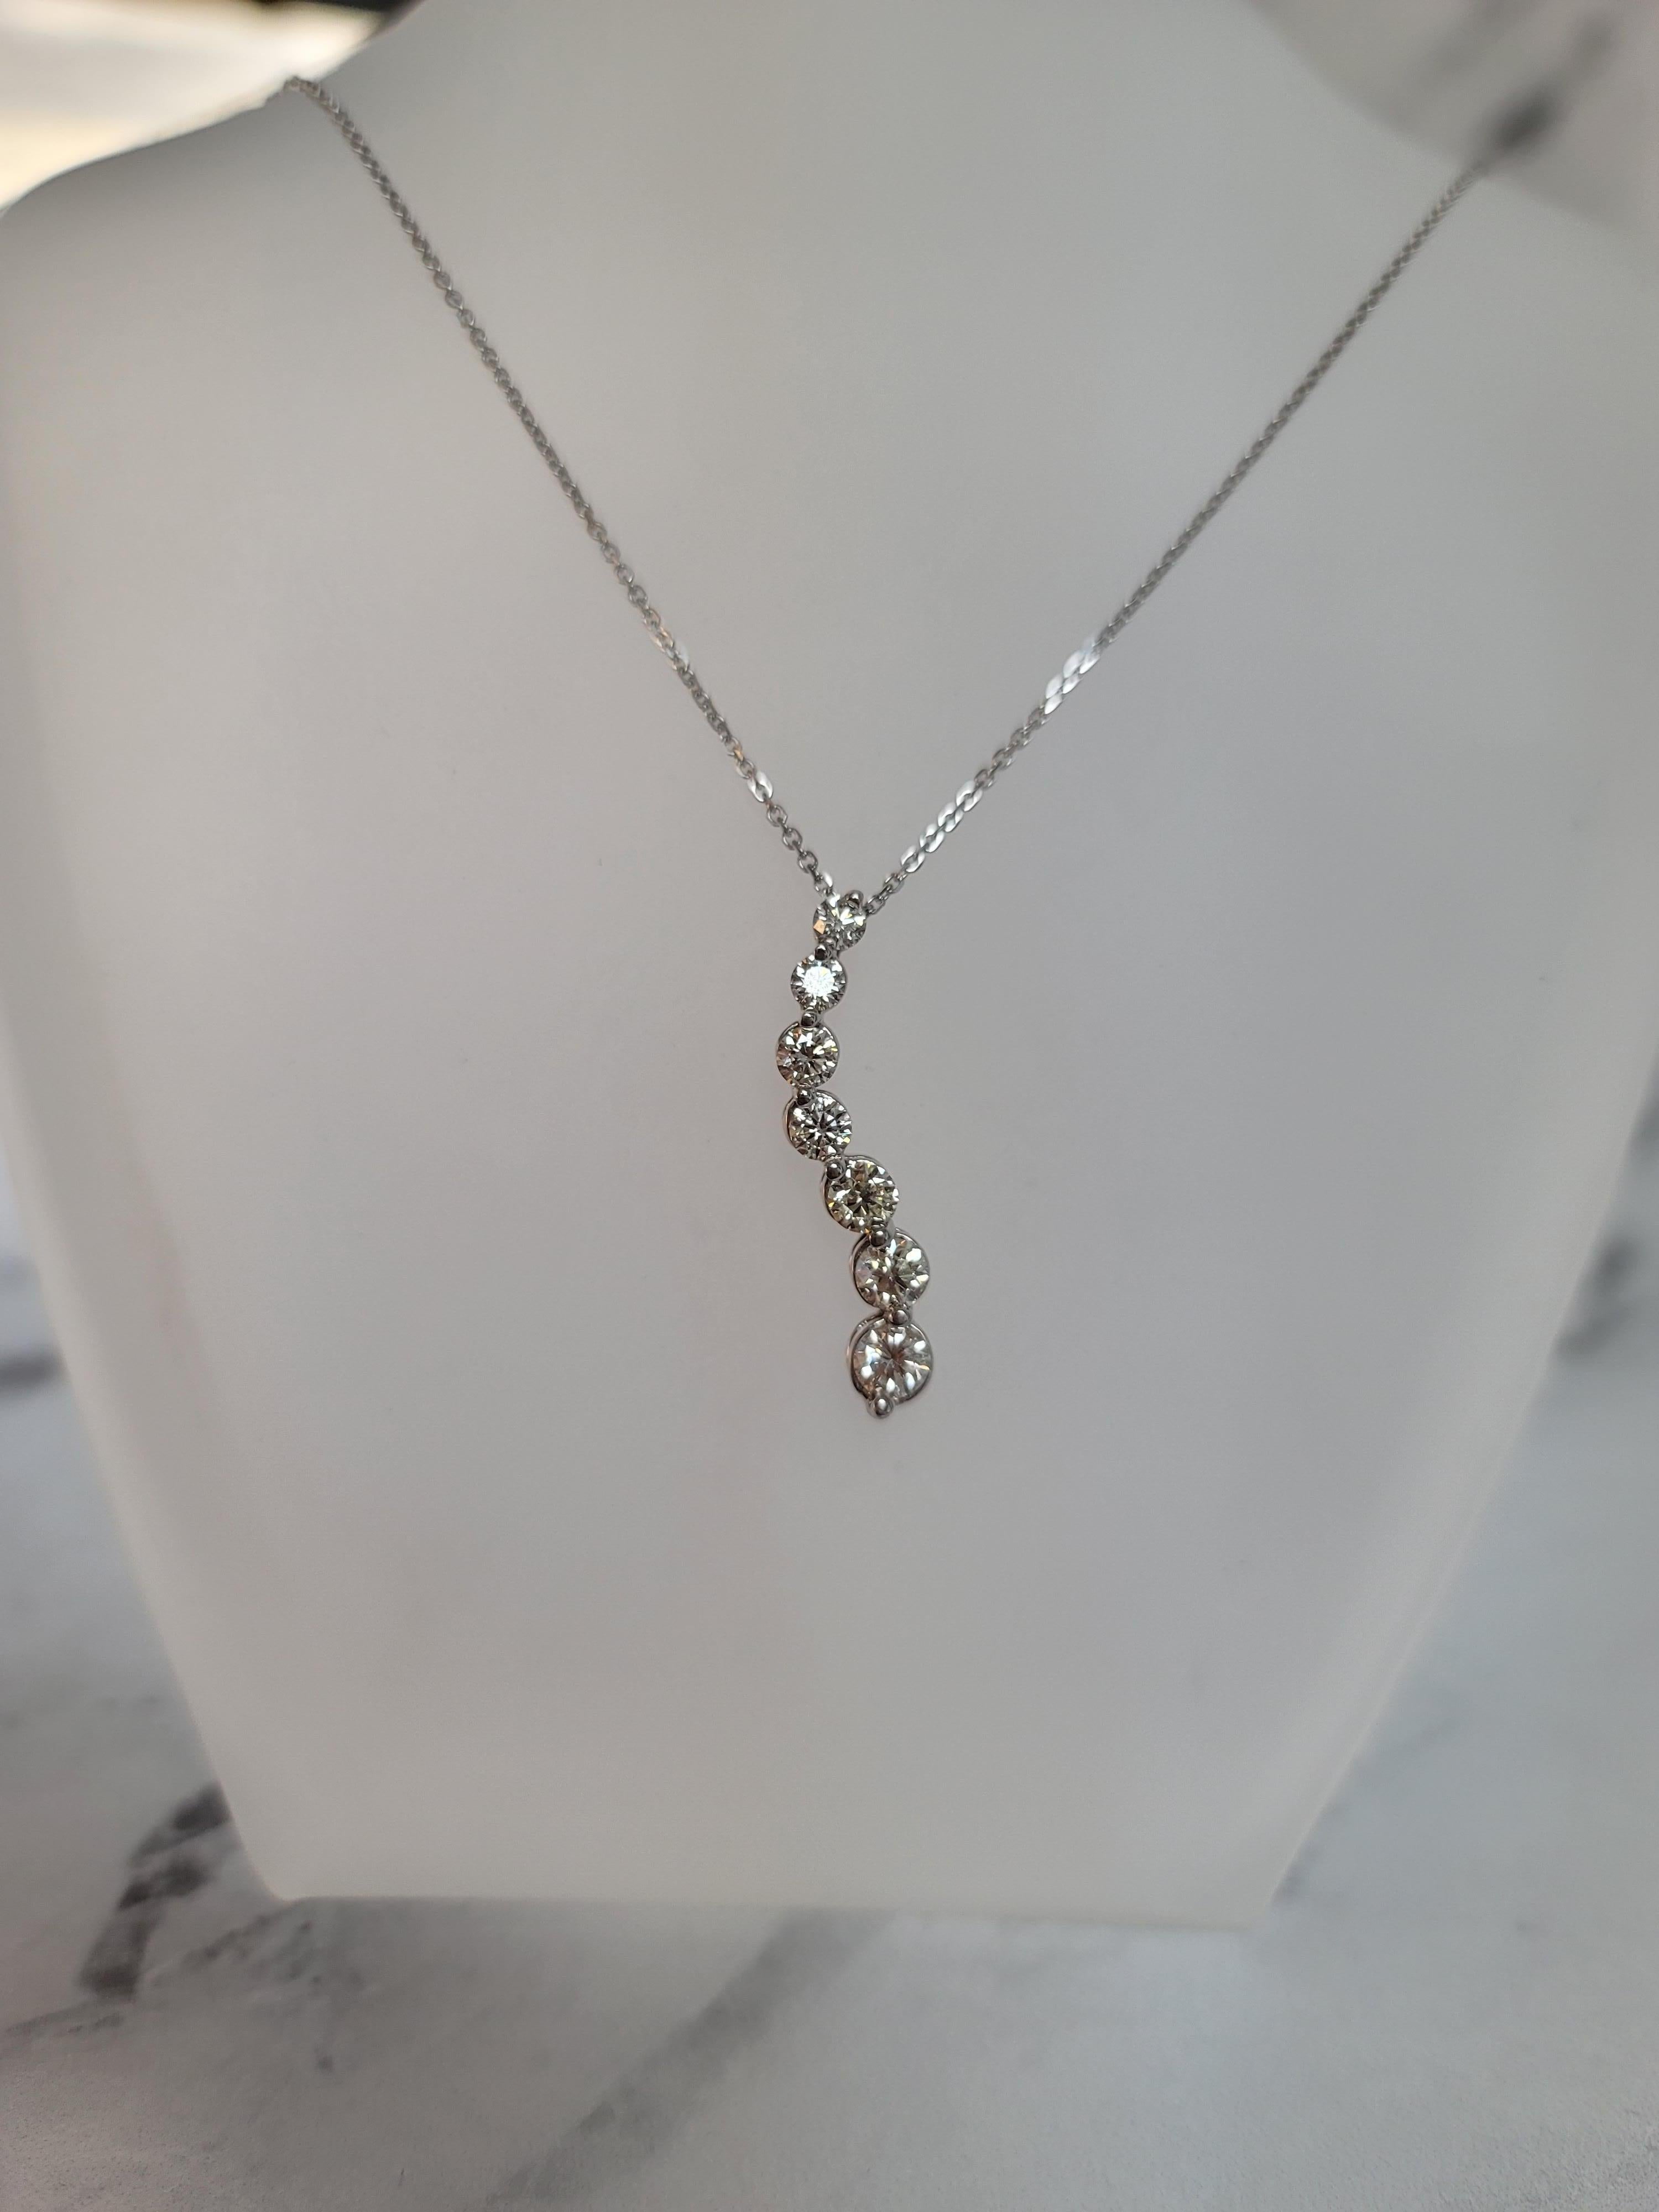 Gradient Diamond Journey Necklace 1.53cttw 14k White Gold In New Condition For Sale In Sugar Land, TX